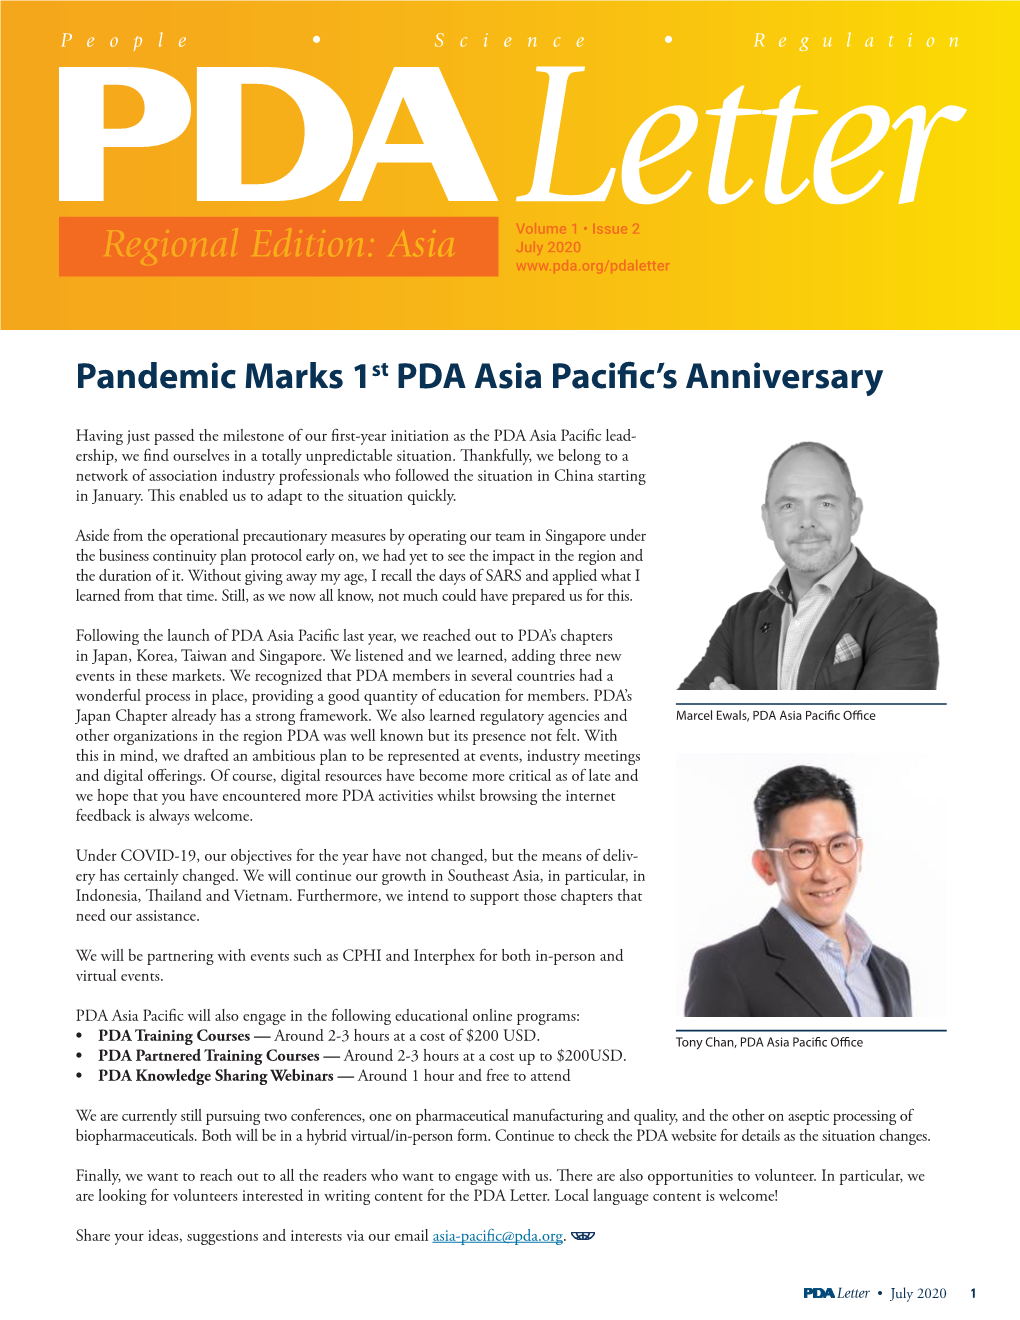 Pandemic Marks 1St PDA Asia Pacific's Anniversary